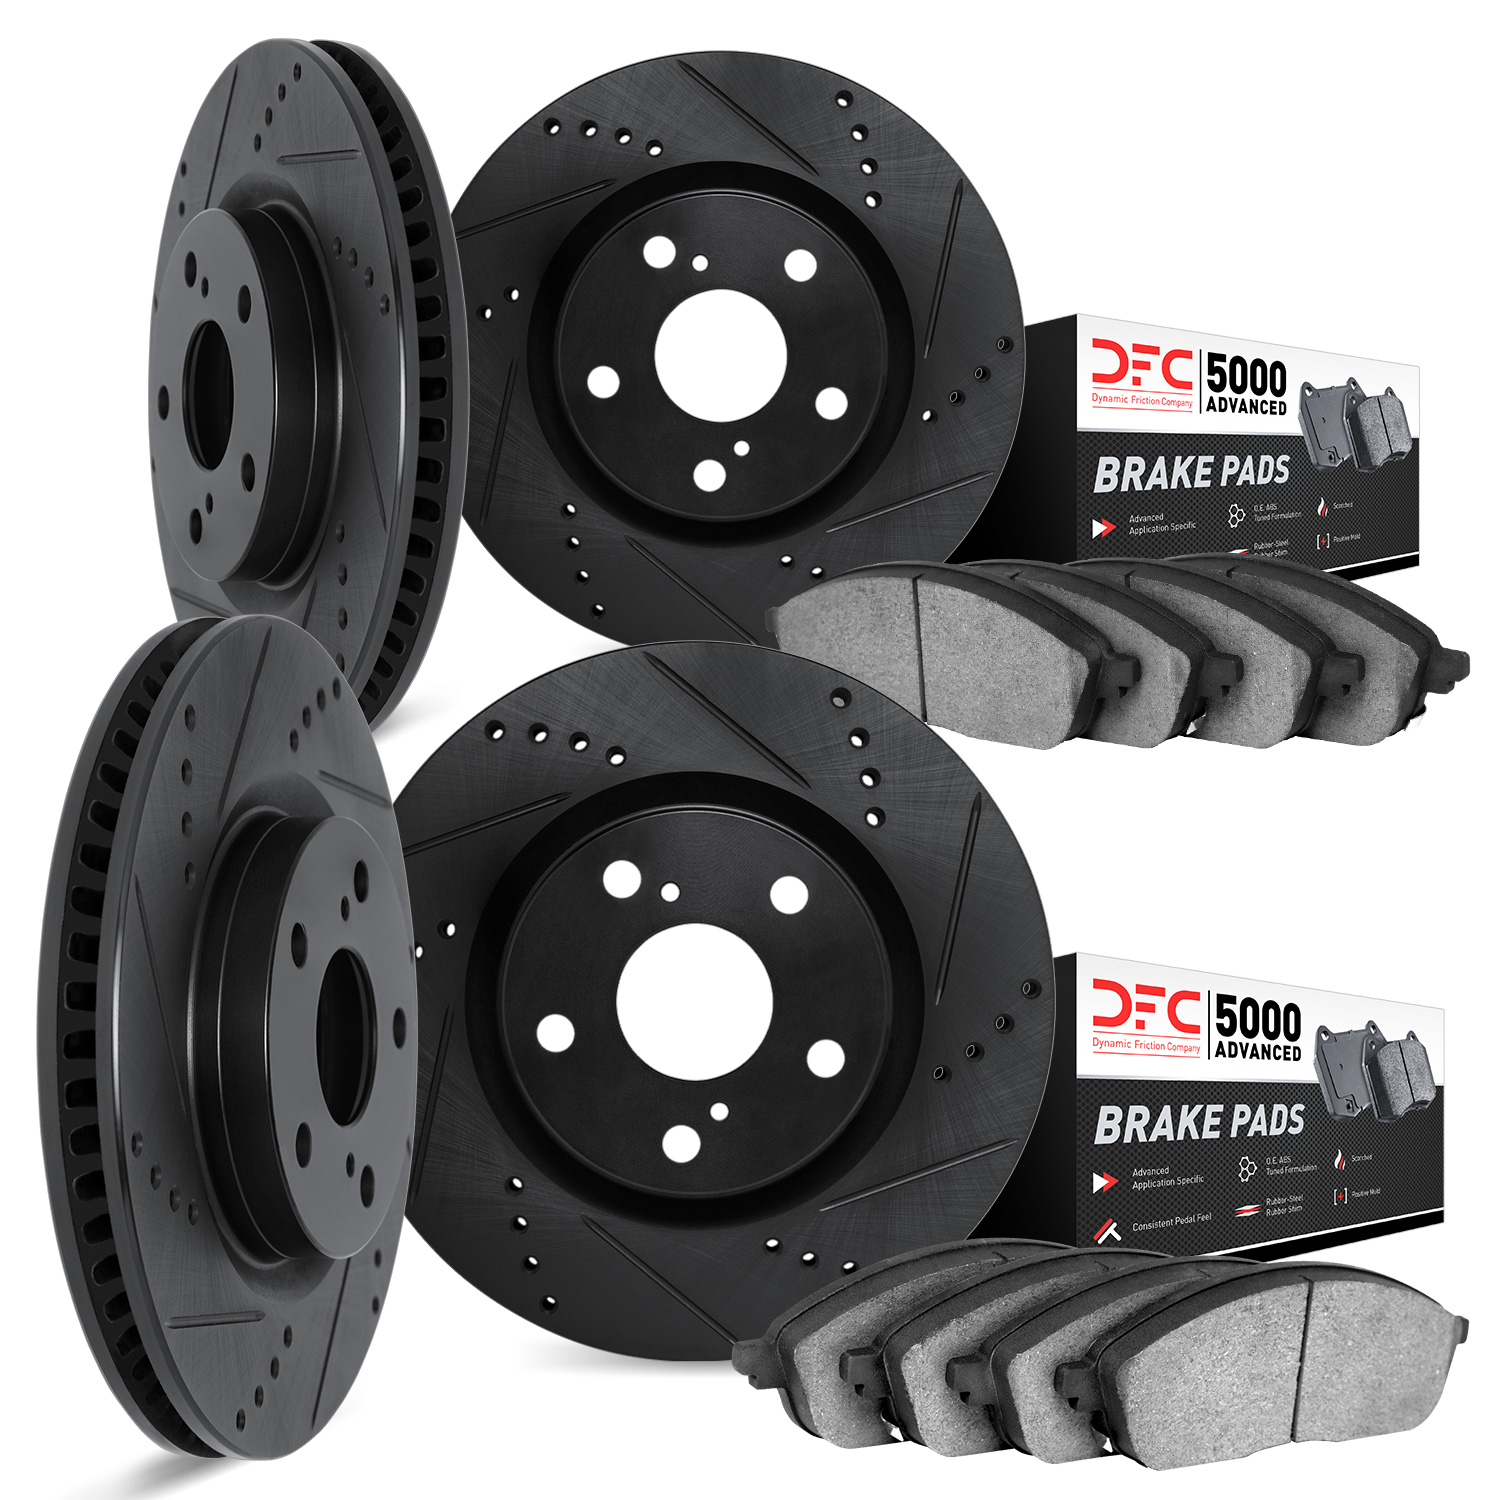 8504-31030 Drilled/Slotted Brake Rotors w/5000 Advanced Brake Pads Kit [Black], 2007-2008 BMW, Position: Front and Rear